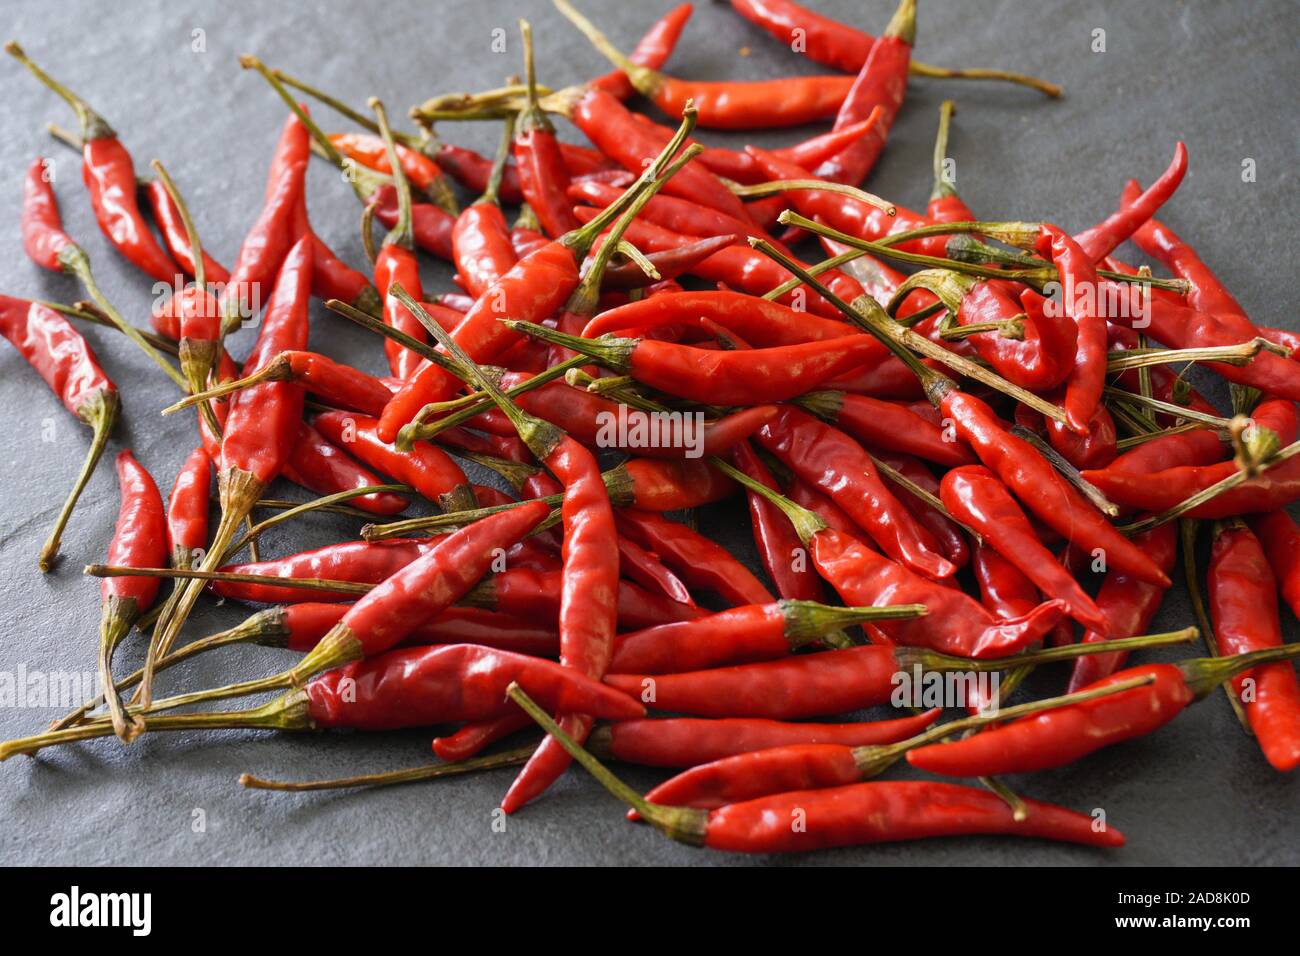 Close-up image of a pile of hot Thai bird chiles on a gray slate background; landscape view Stock Photo